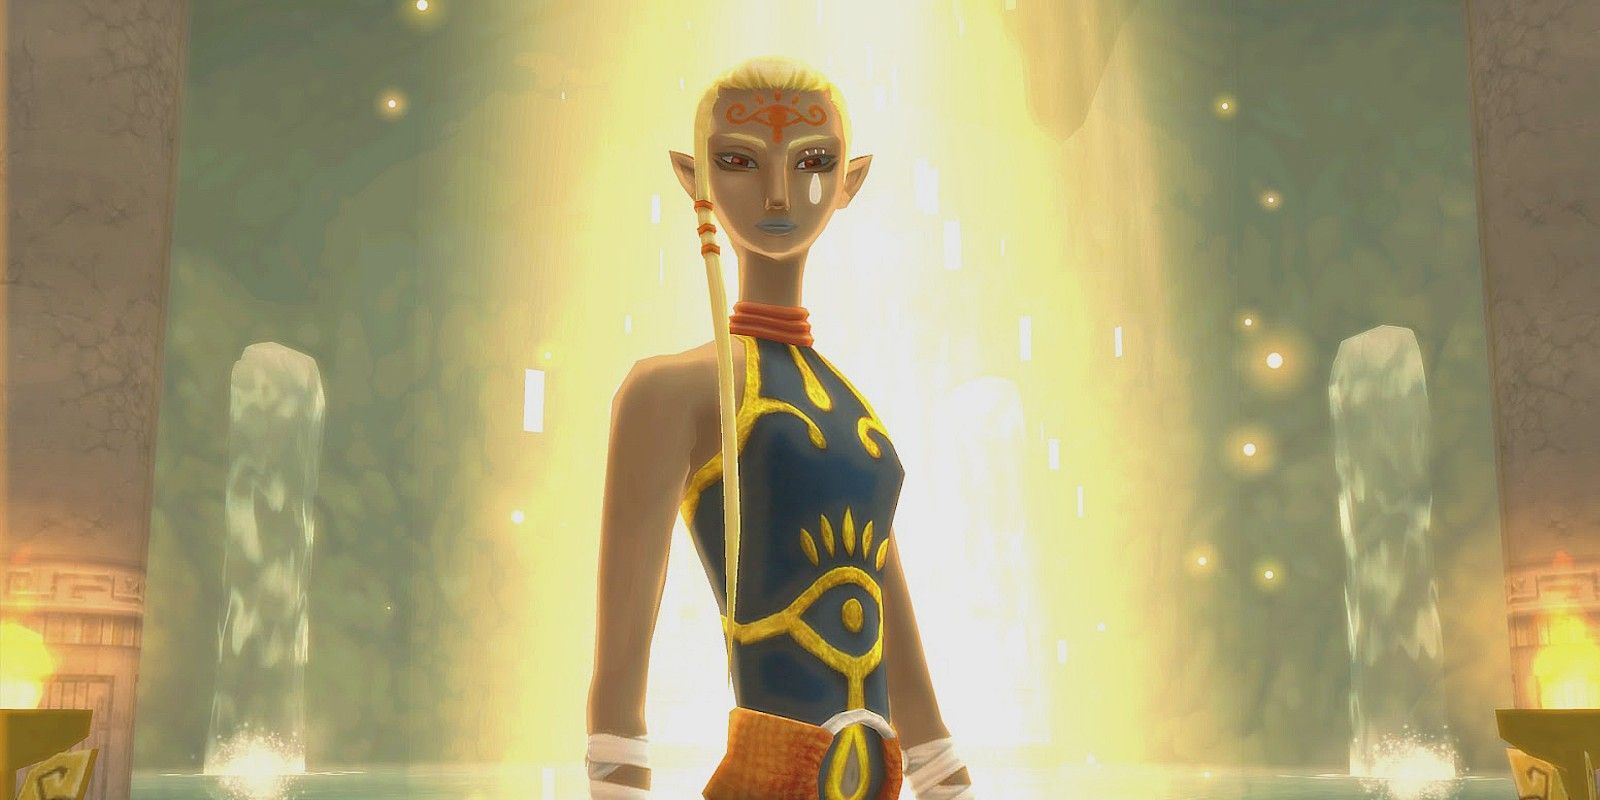 Impa's predestined importance to the series is explained in Skyward Sword